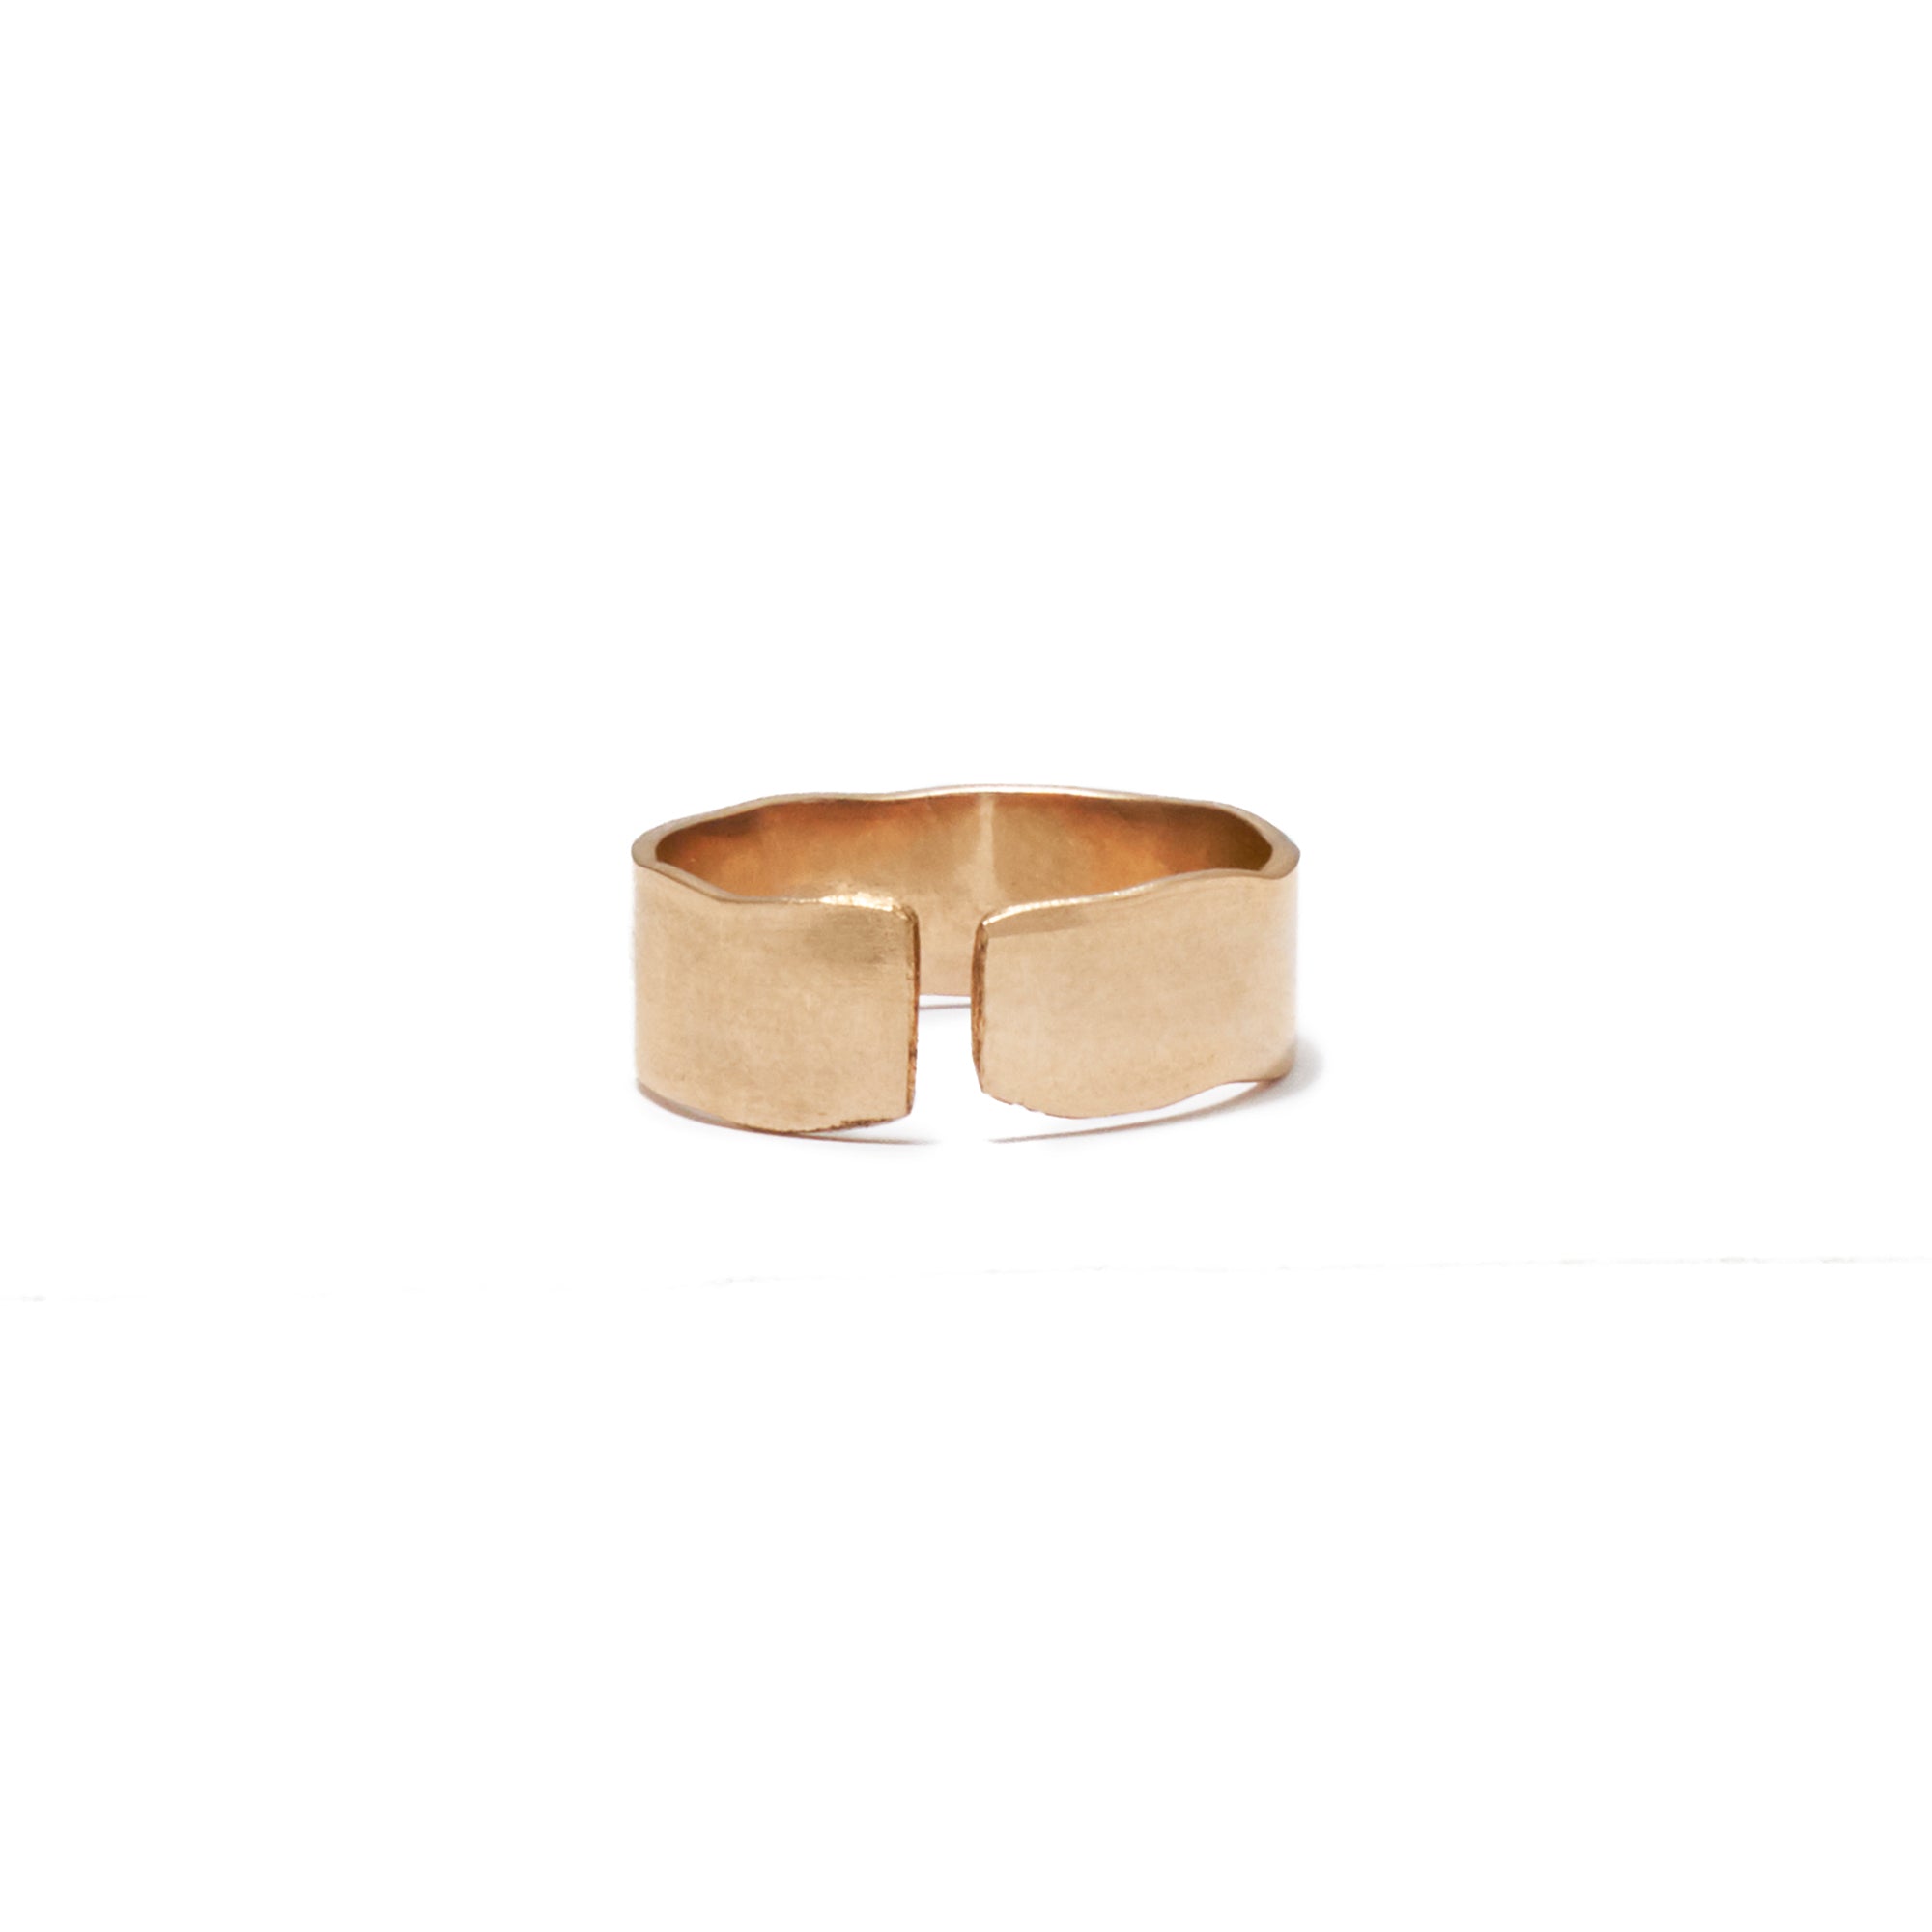 The Mazzo Ring, part of the Sorda Collection, has an open front that can be adjusted slightly to fit the desired finger.